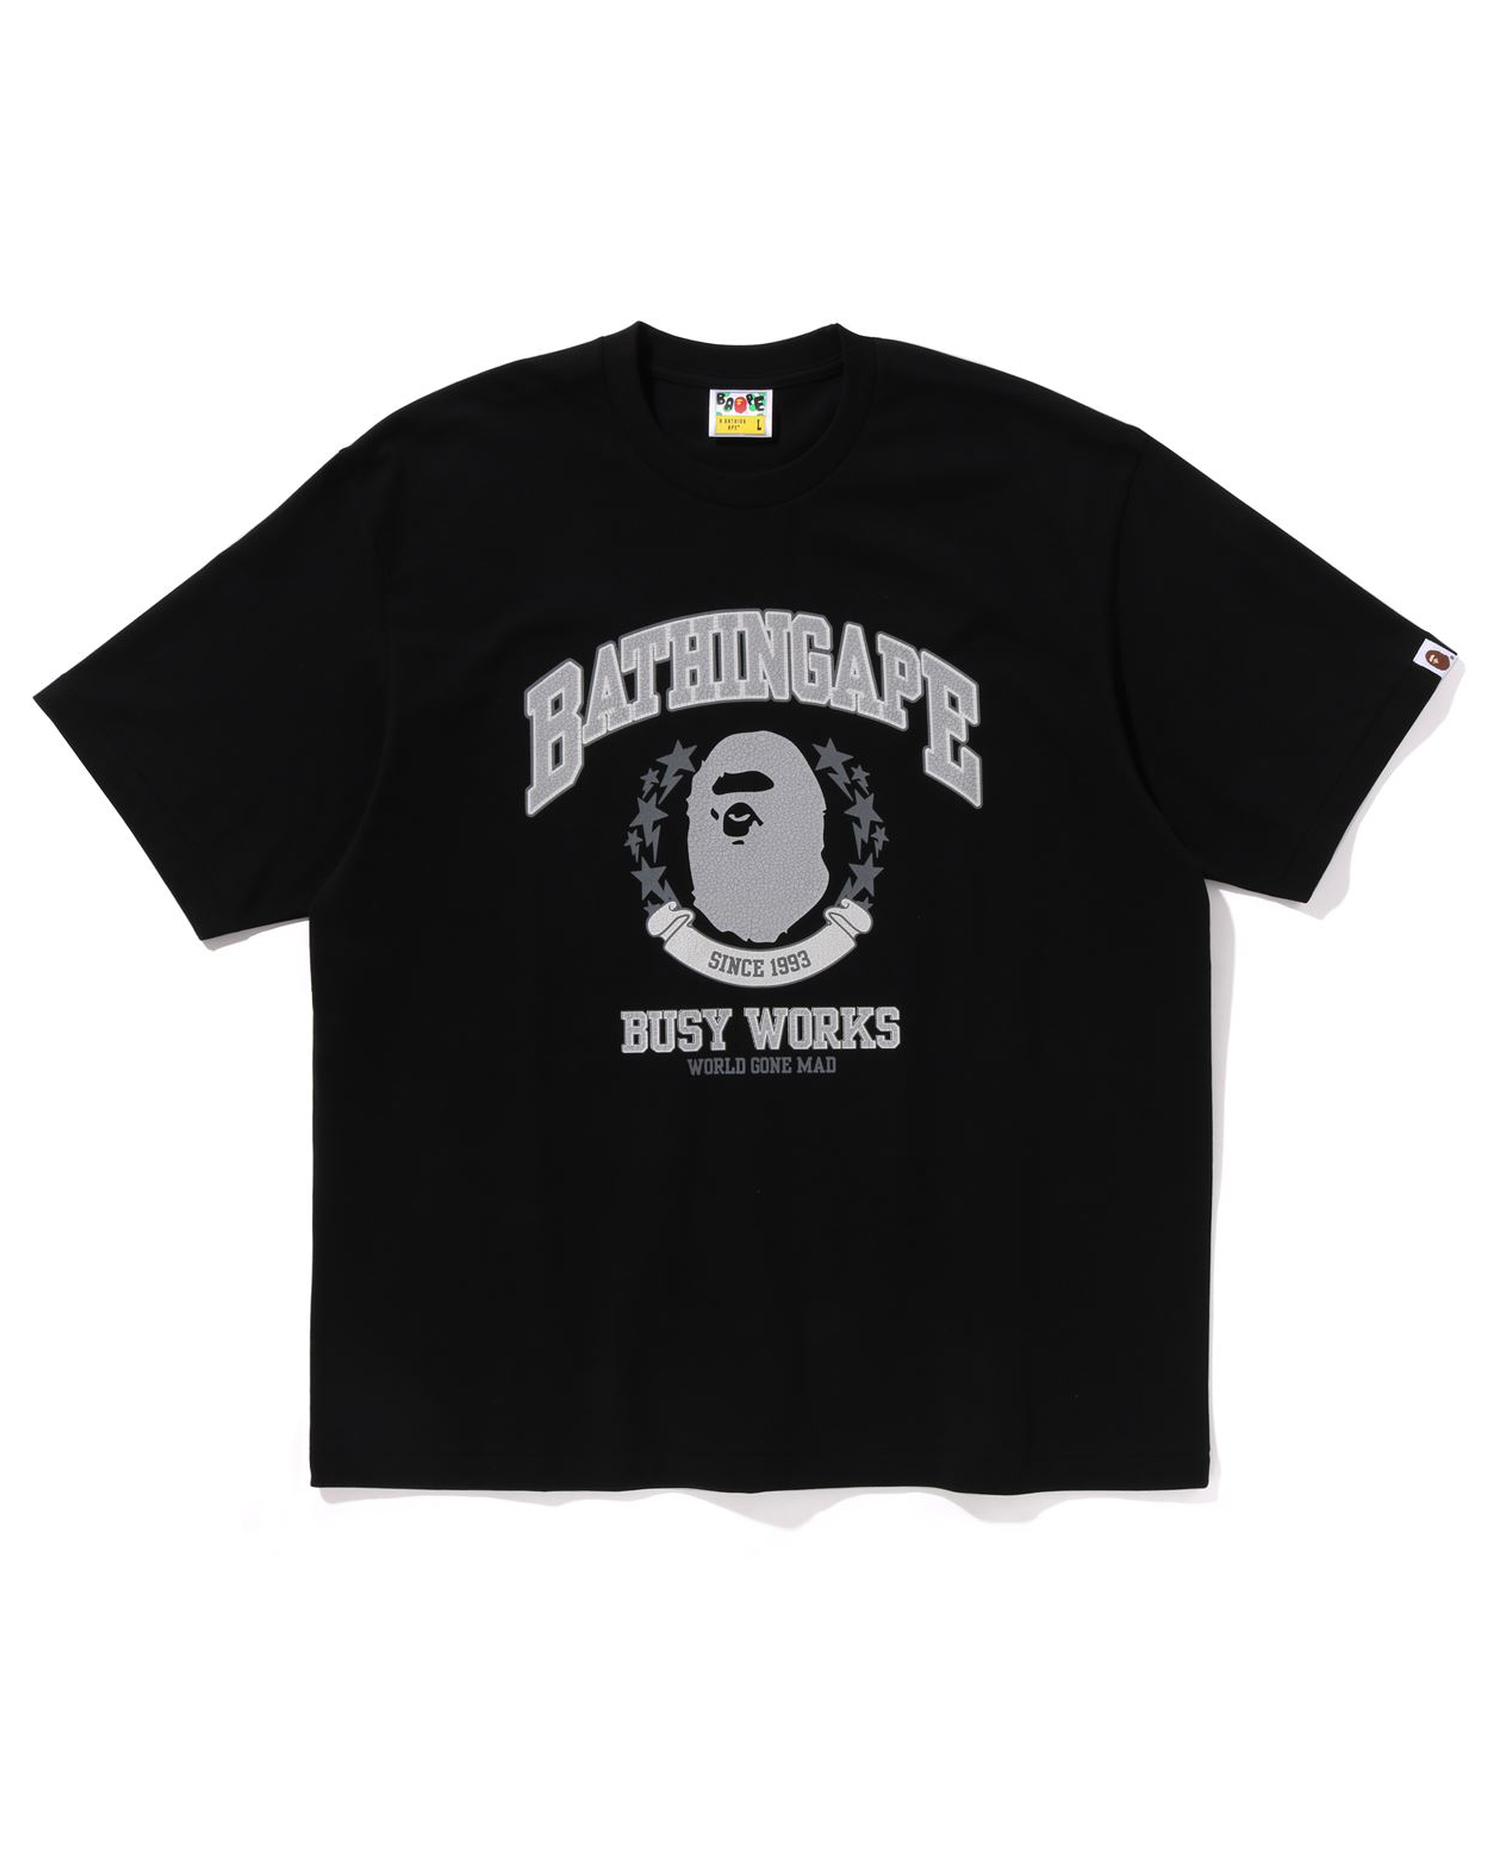 Shop Bathing Ape Relaxed Fit Tee Online | BAPE